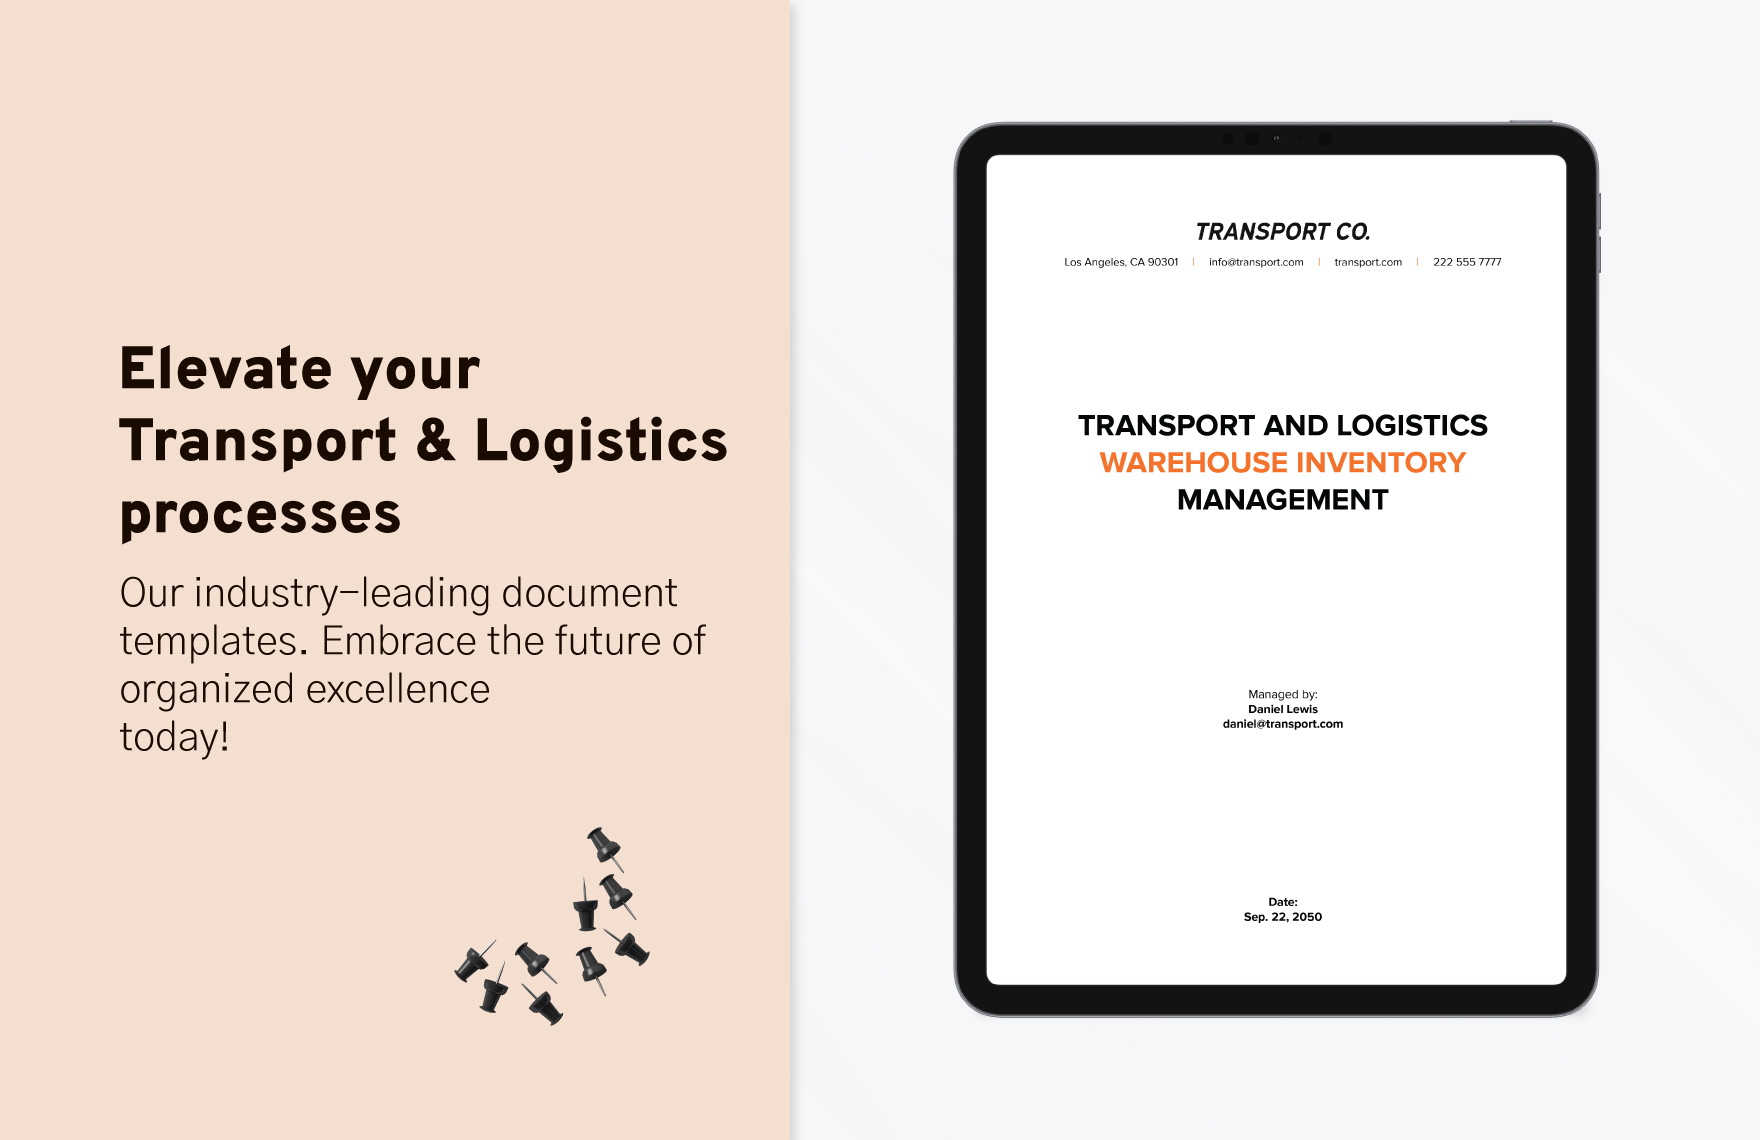 Transport and Logistics Warehouse Inventory Management Template